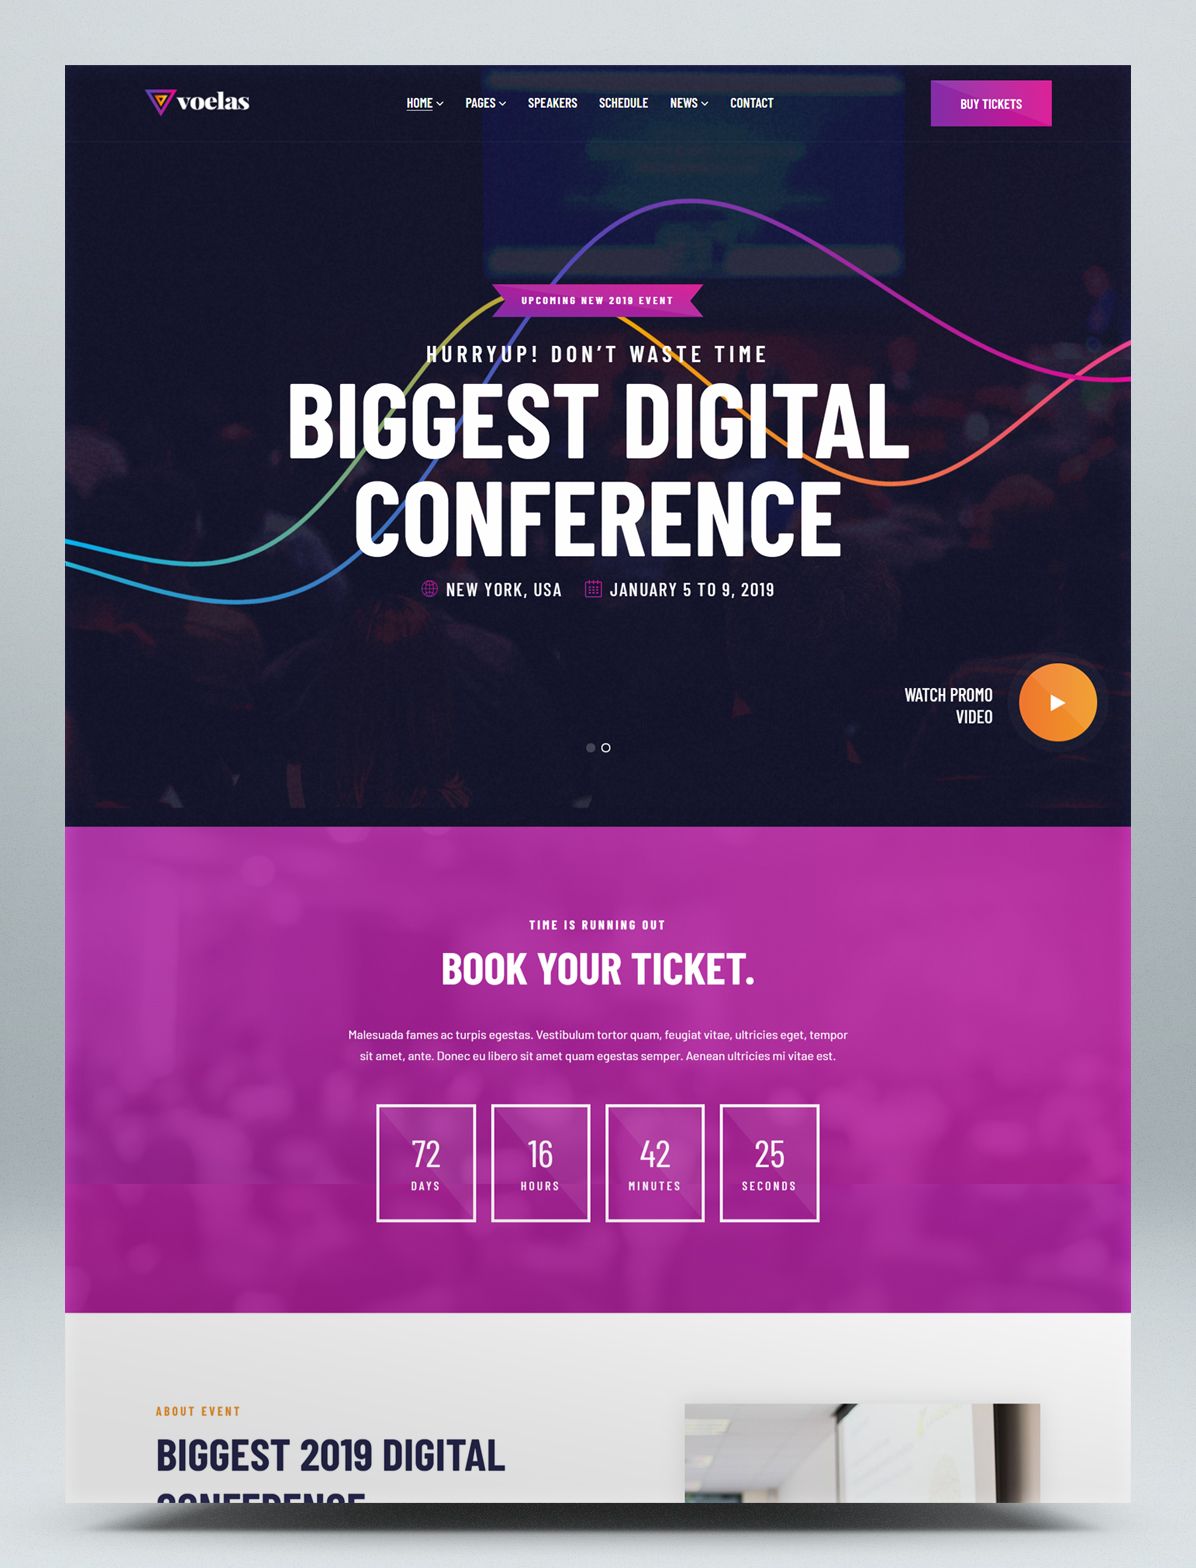 Event & Conference HTML Website Template | Website template, Html